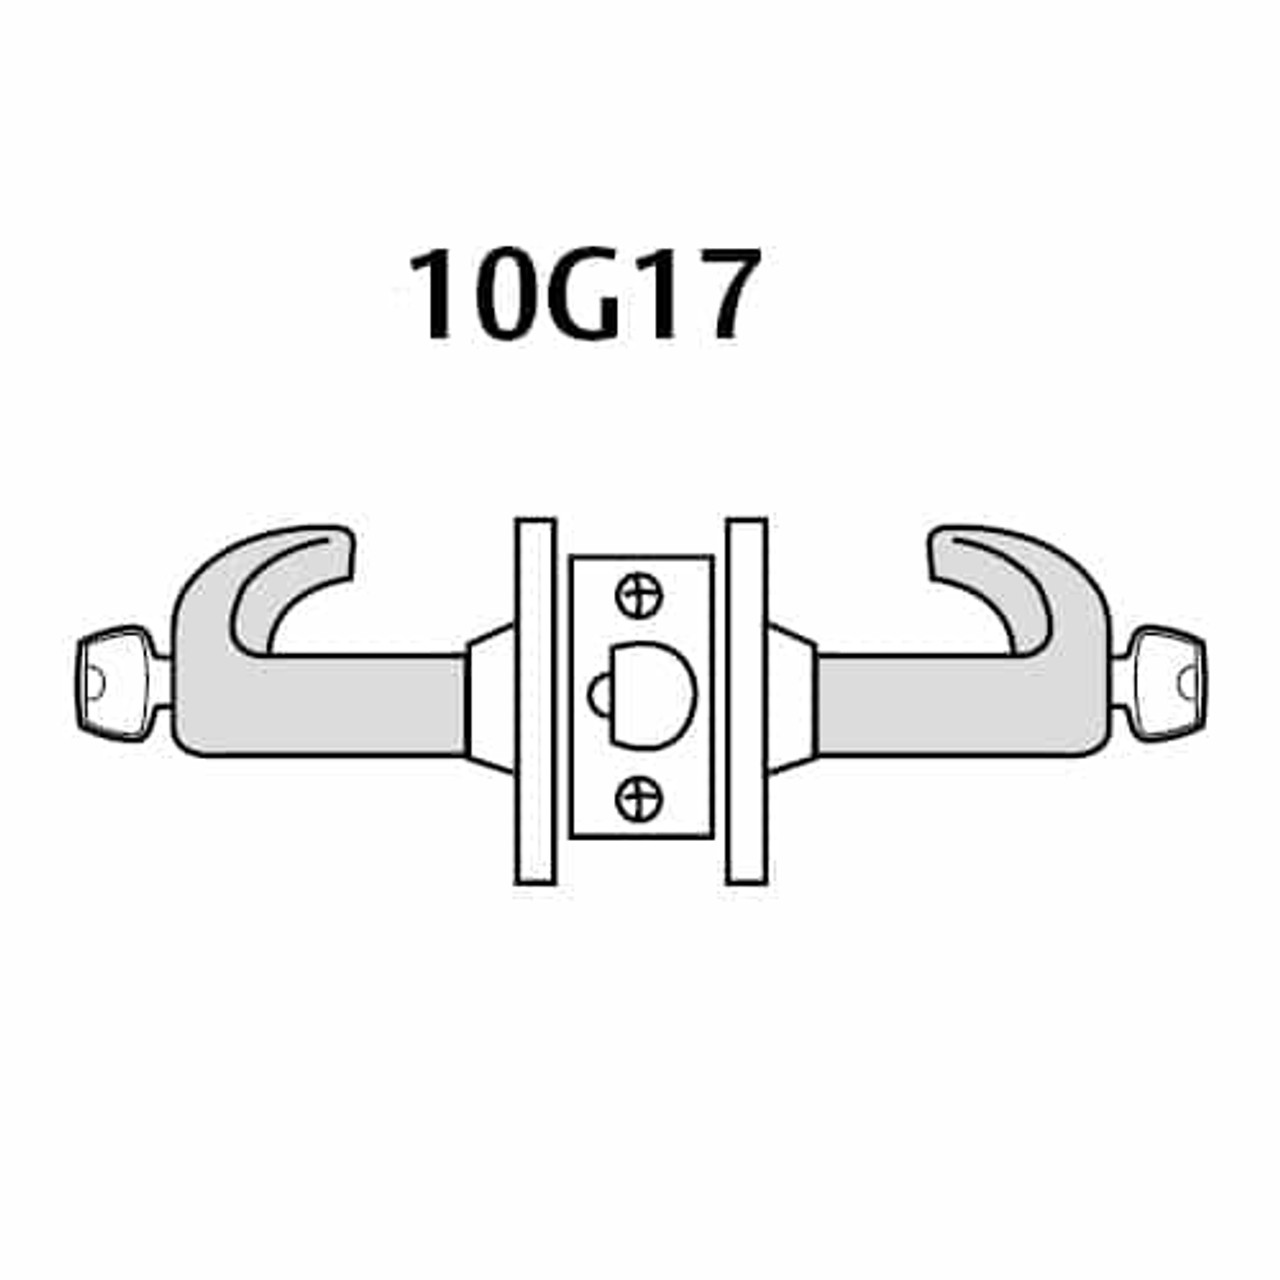 2860-10G17-GB-26 Sargent 10 Line Cylindrical Institutional Locks with B Lever Design and G Rose Prepped for LFIC in Bright Chrome